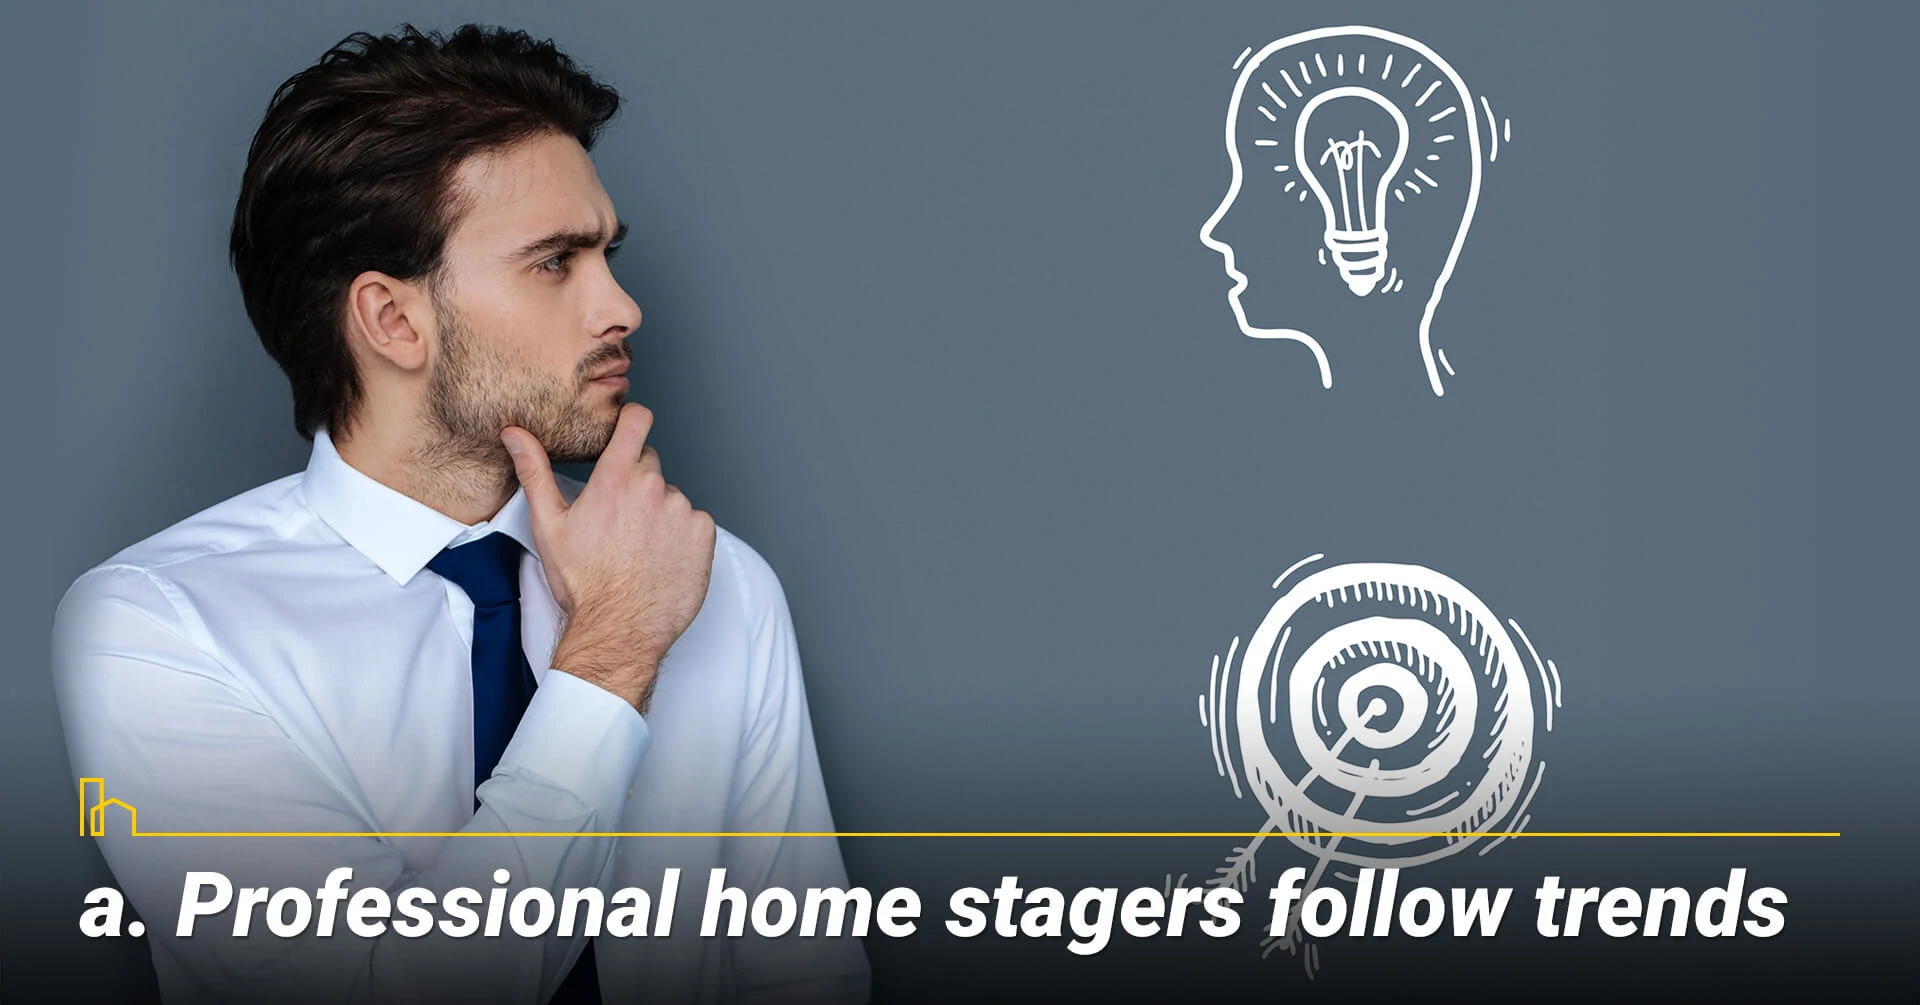 Professional home stagers follow trends, use eye-catching staging trends